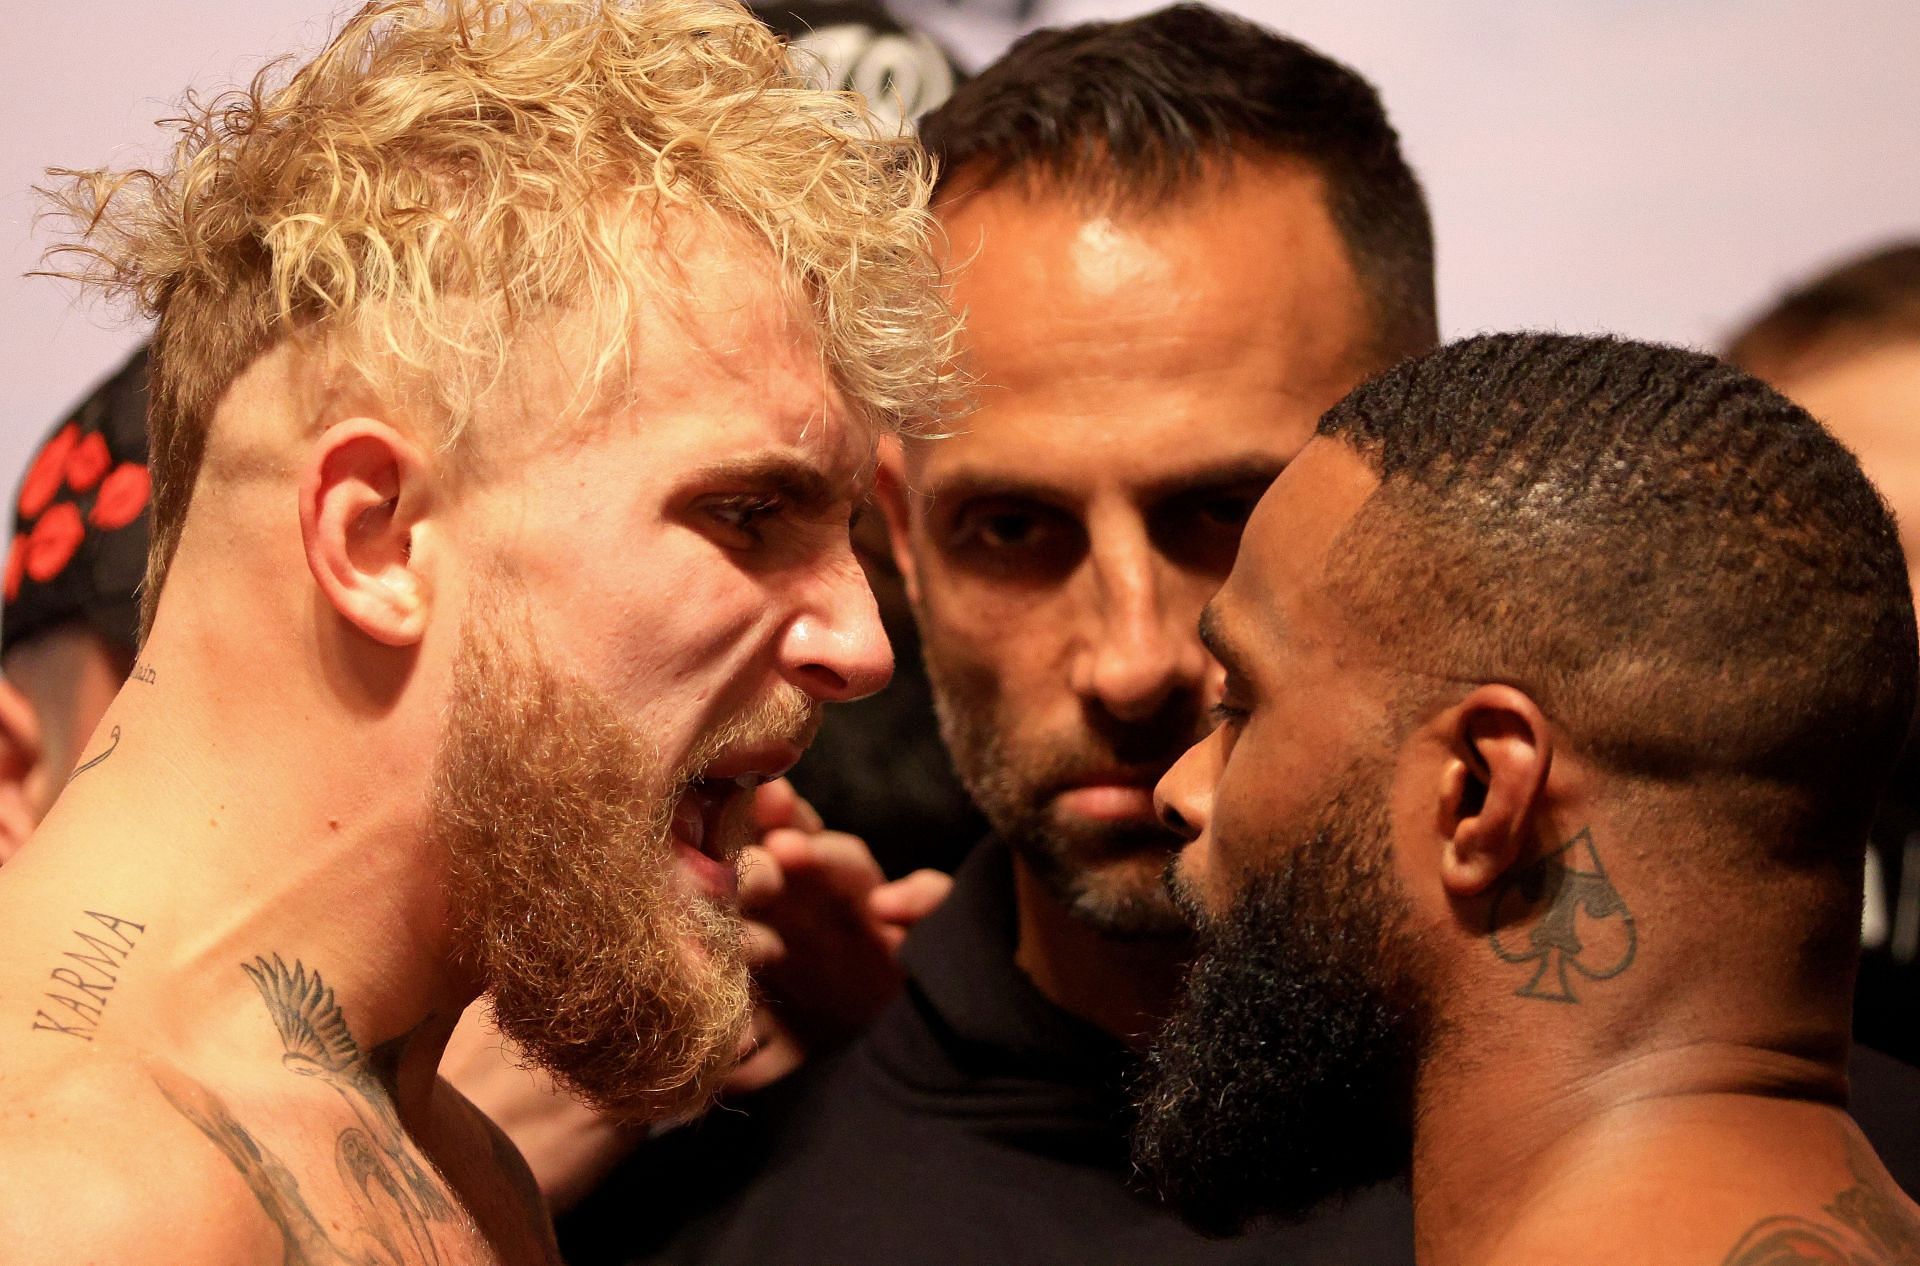 Jake Paul v Tyron Woodley - Weigh-in